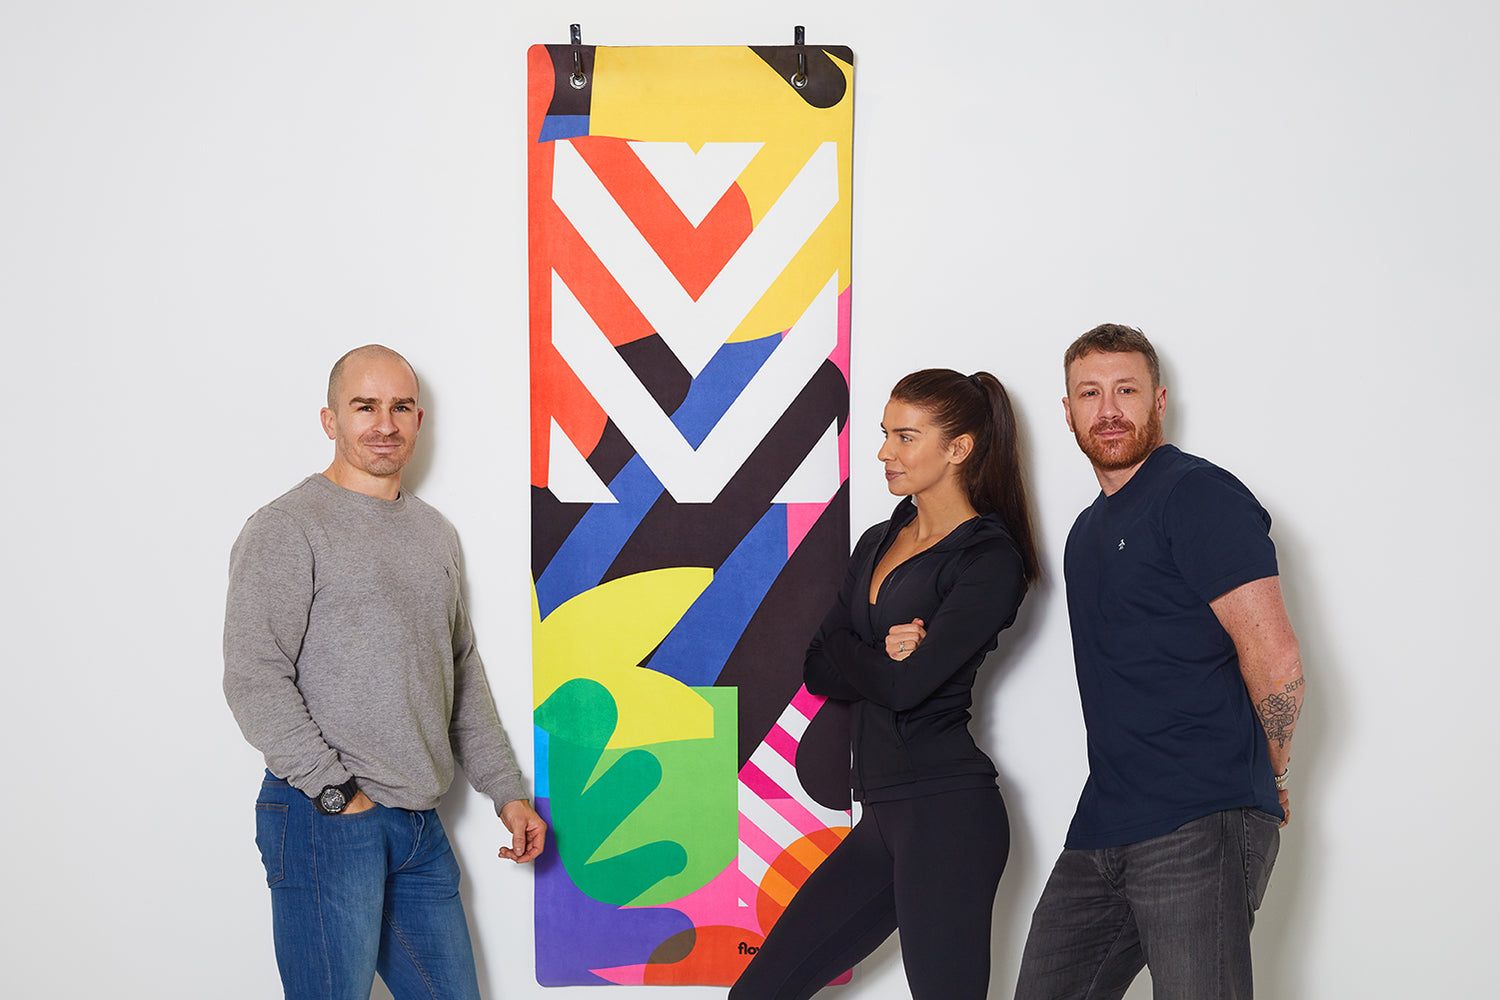 Adrienne, John and Maser from Flowstate standing in front of a hanging yoga mat